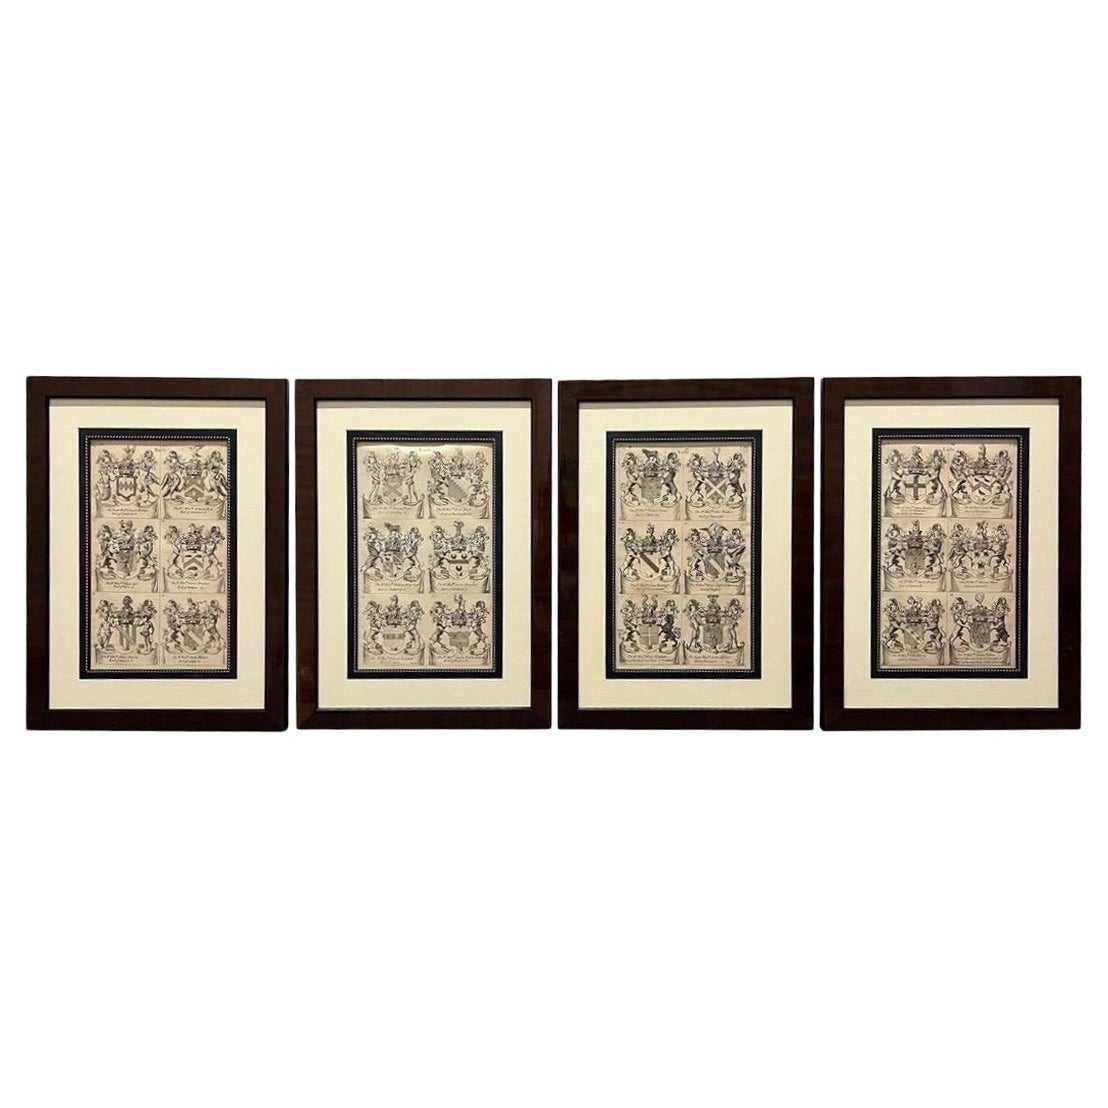 19th Century, “Earls" Continental Armorial Etchings, Framed, Set of 4